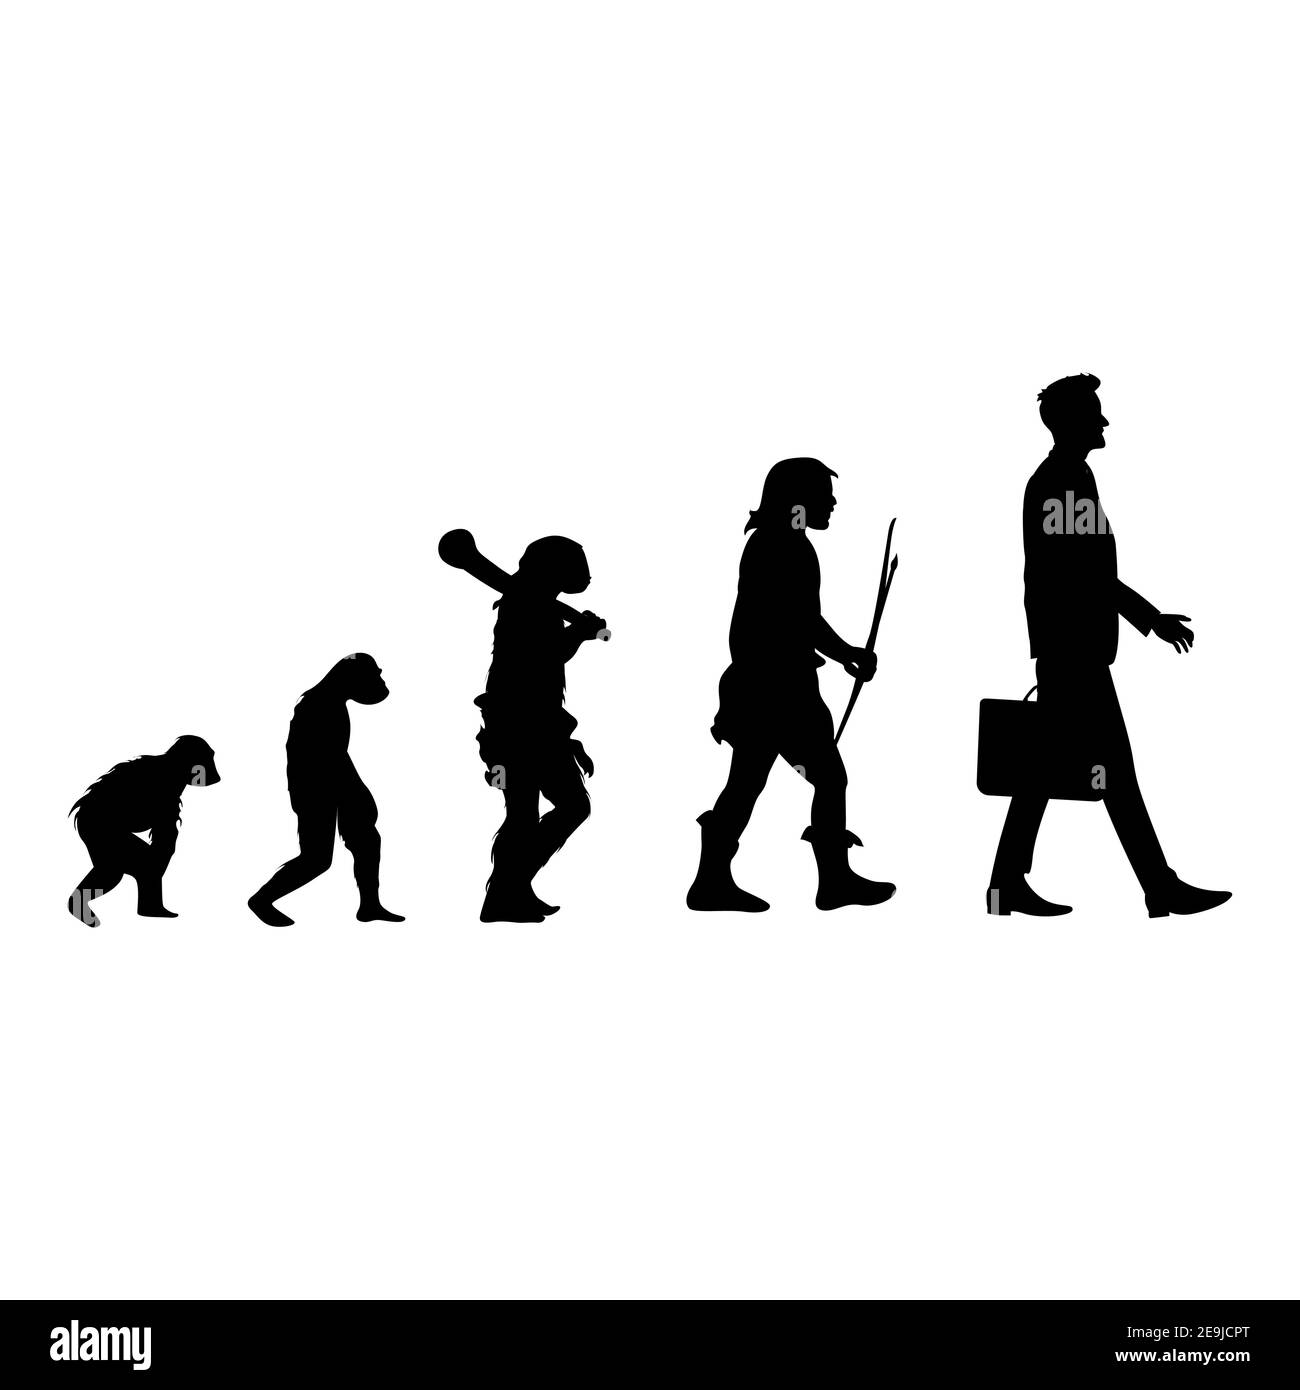 Human evolution black silhouette, from ape to man. Vector human silhouette, monkey and caveman, walking homo graphic evolution illustration, history p Stock Vector